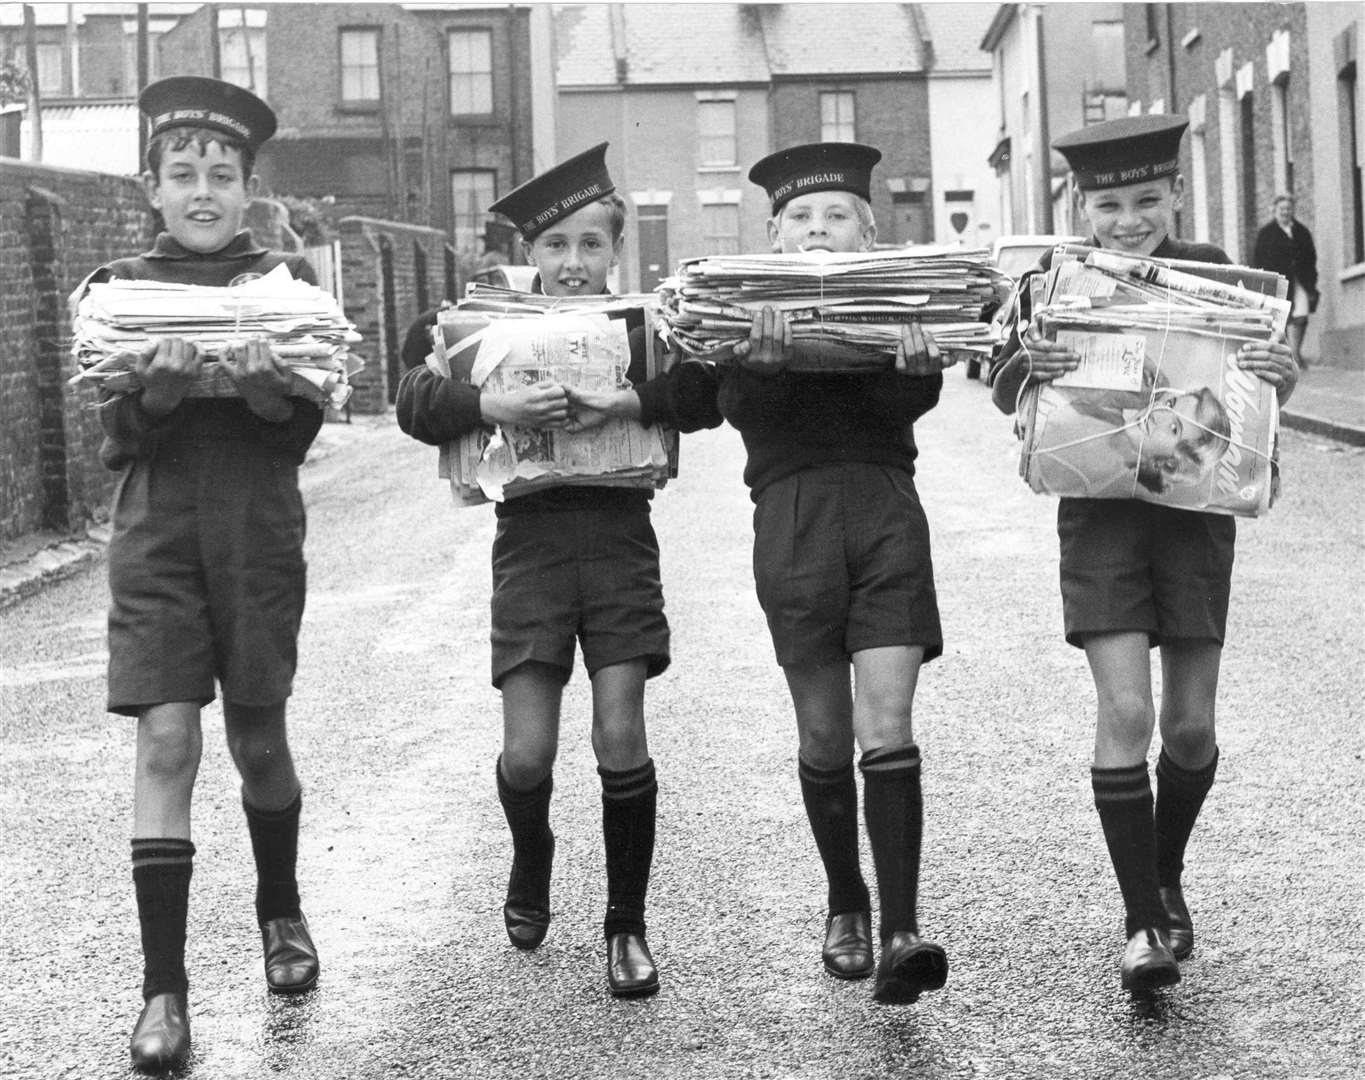 David Atkinson, Andrew Nicholson, Trevor Gransden and Paul Edwards raised money for 1st Strood Boy's Brigade in 1969 by collecting waste paper. The cash went to a fund for a campsite and training centre